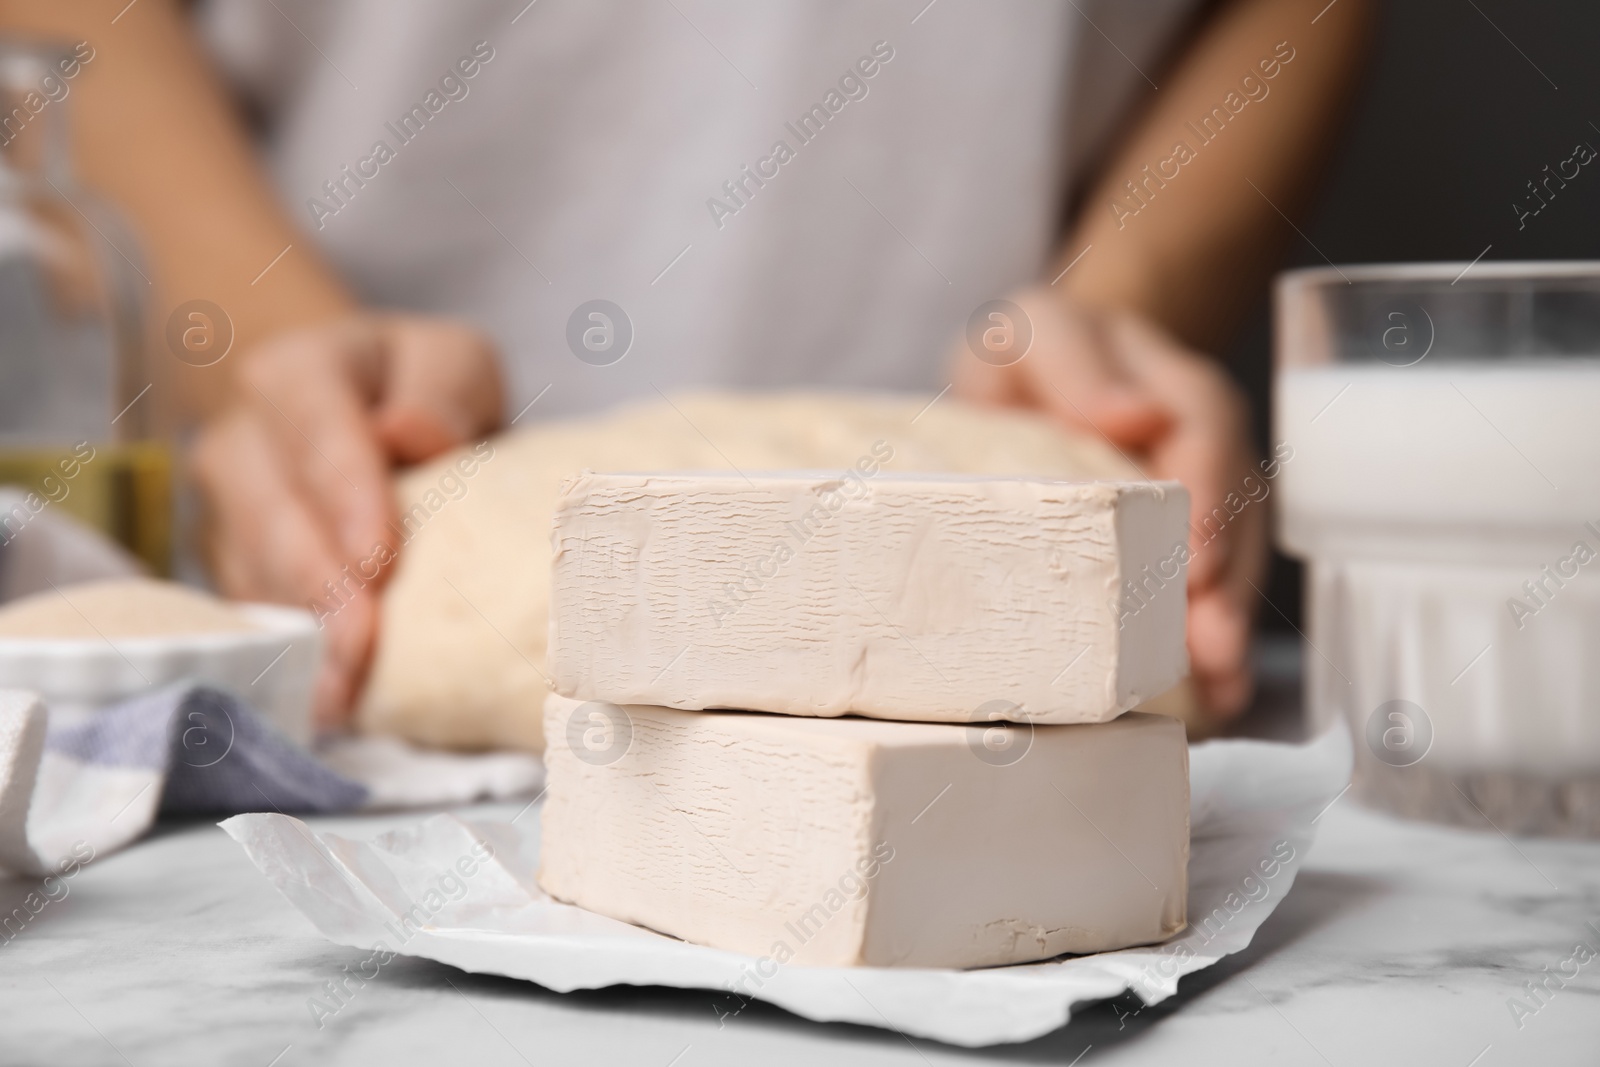 Photo of Woman kneading dough at table, focus on blocks of compressed yeast